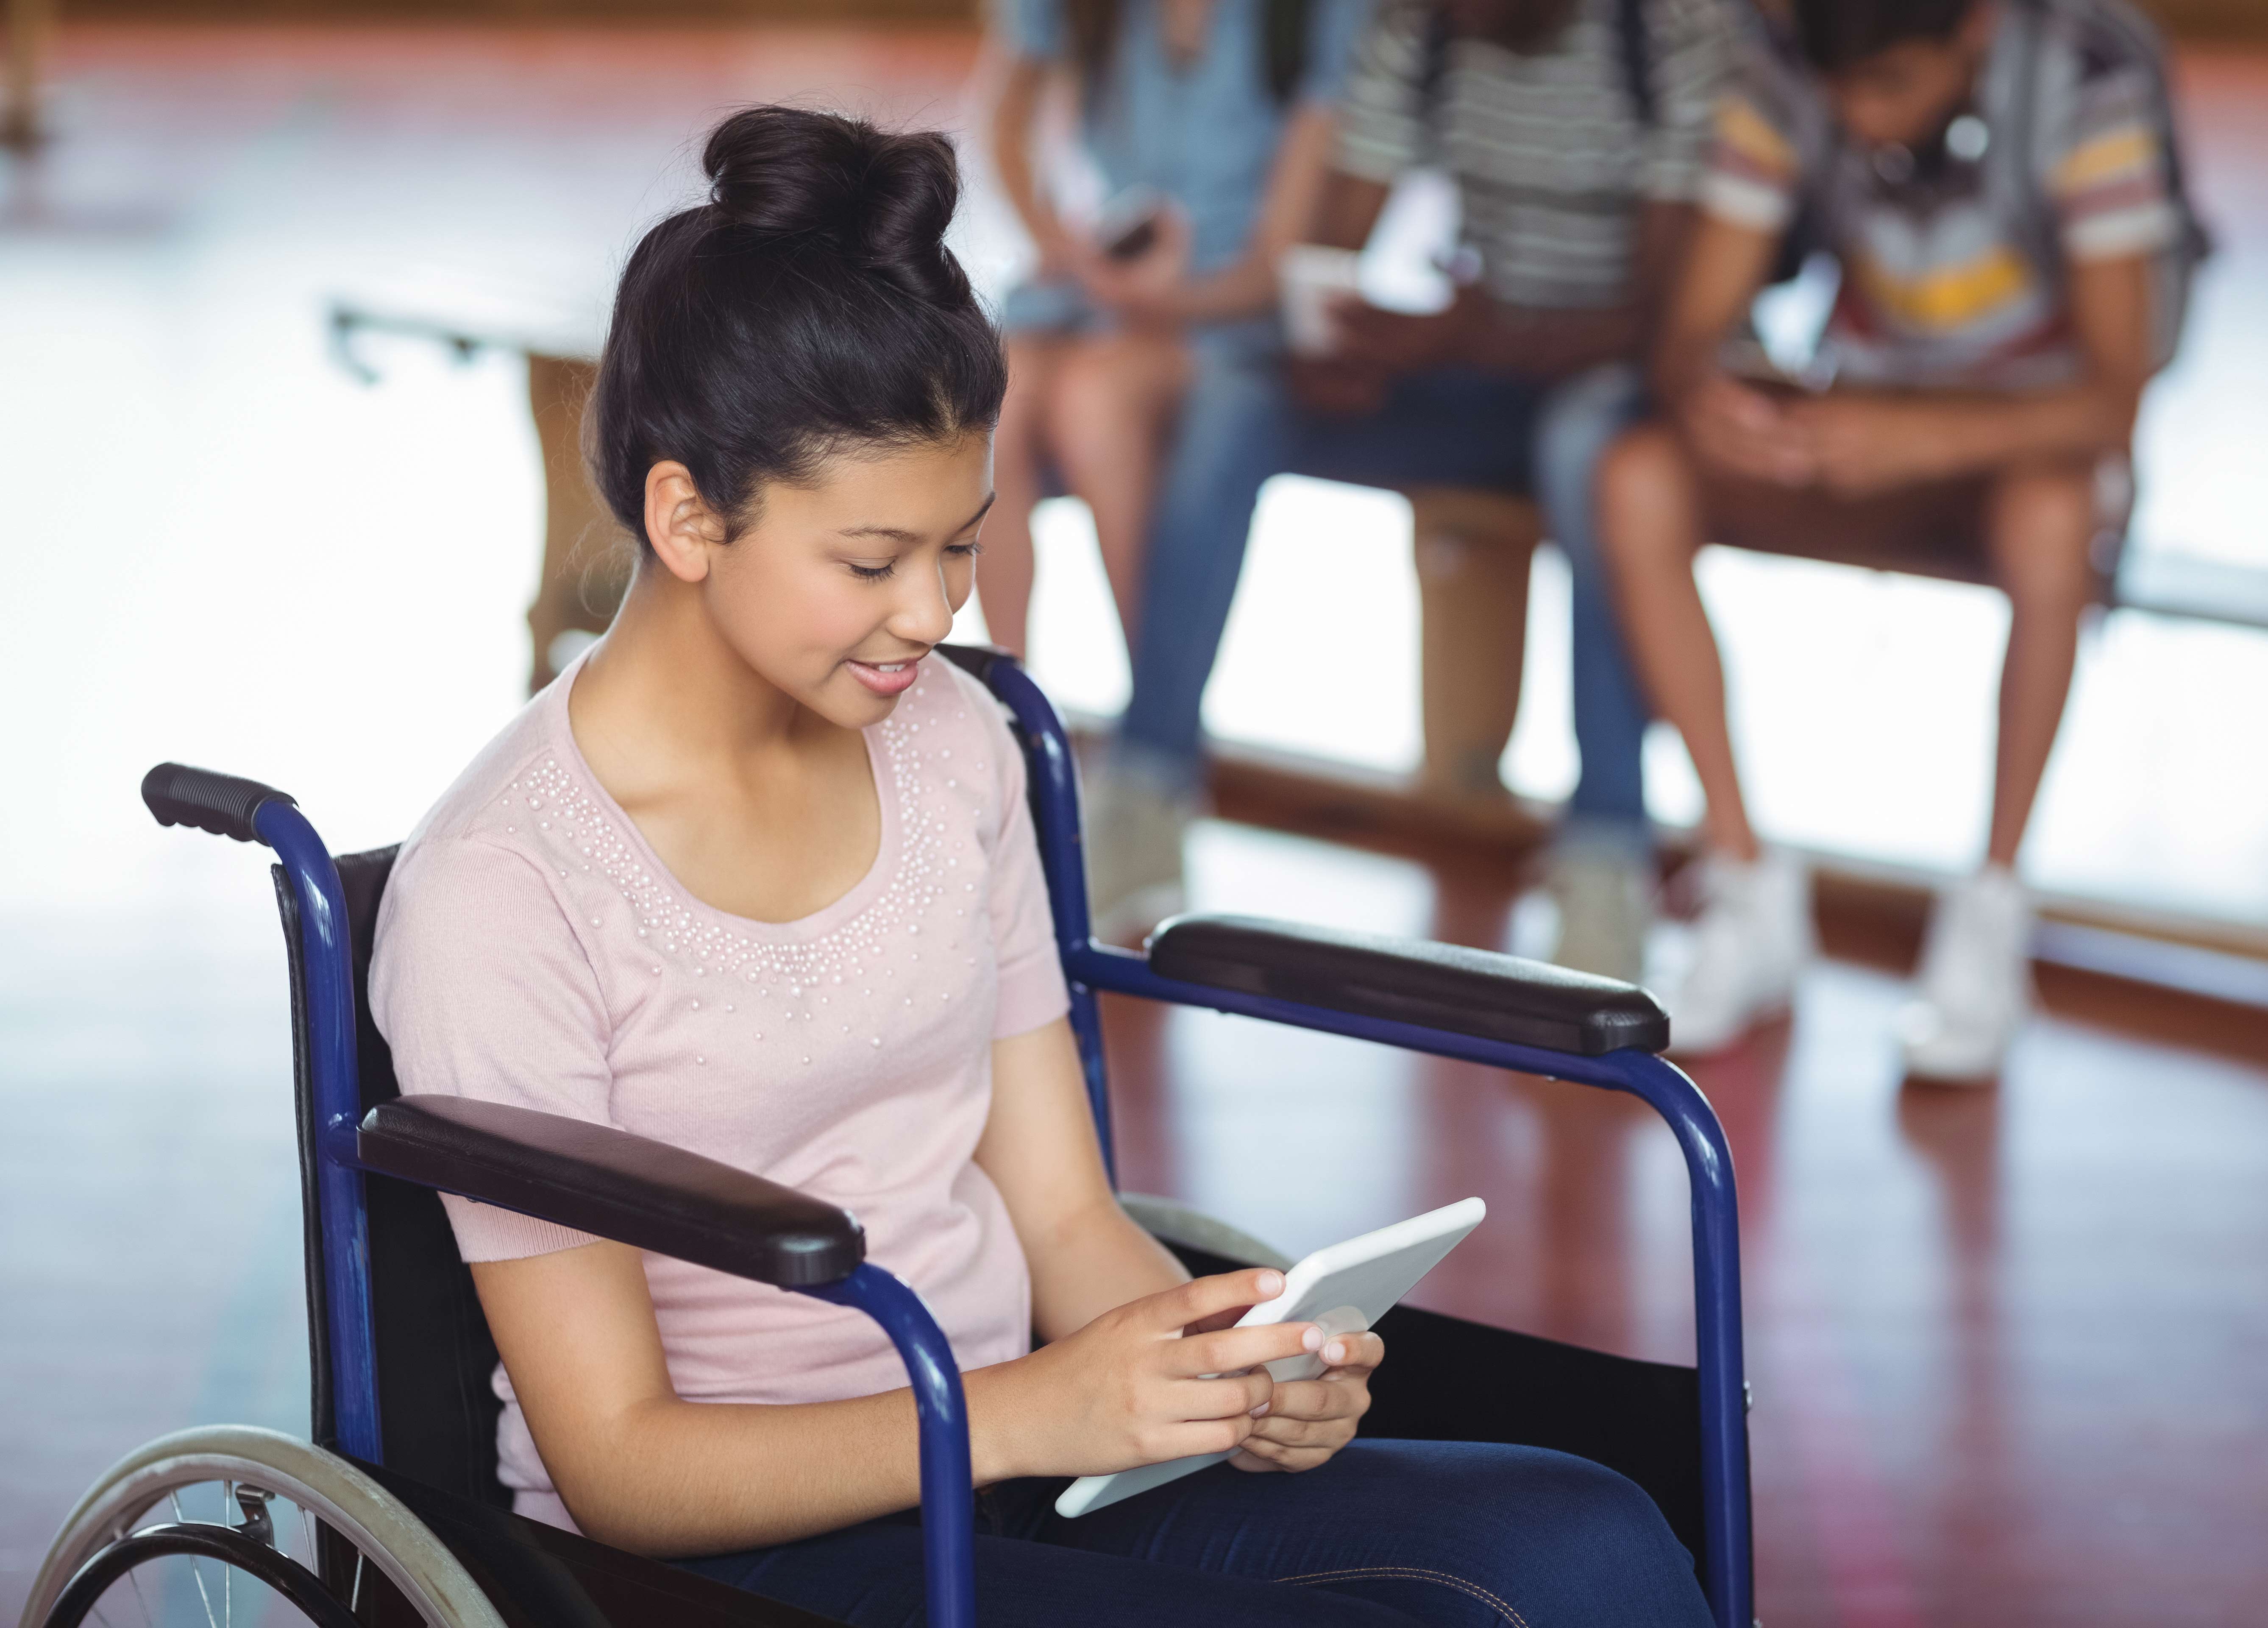 Disabled schoolgirl using digital tablet with classmates in background